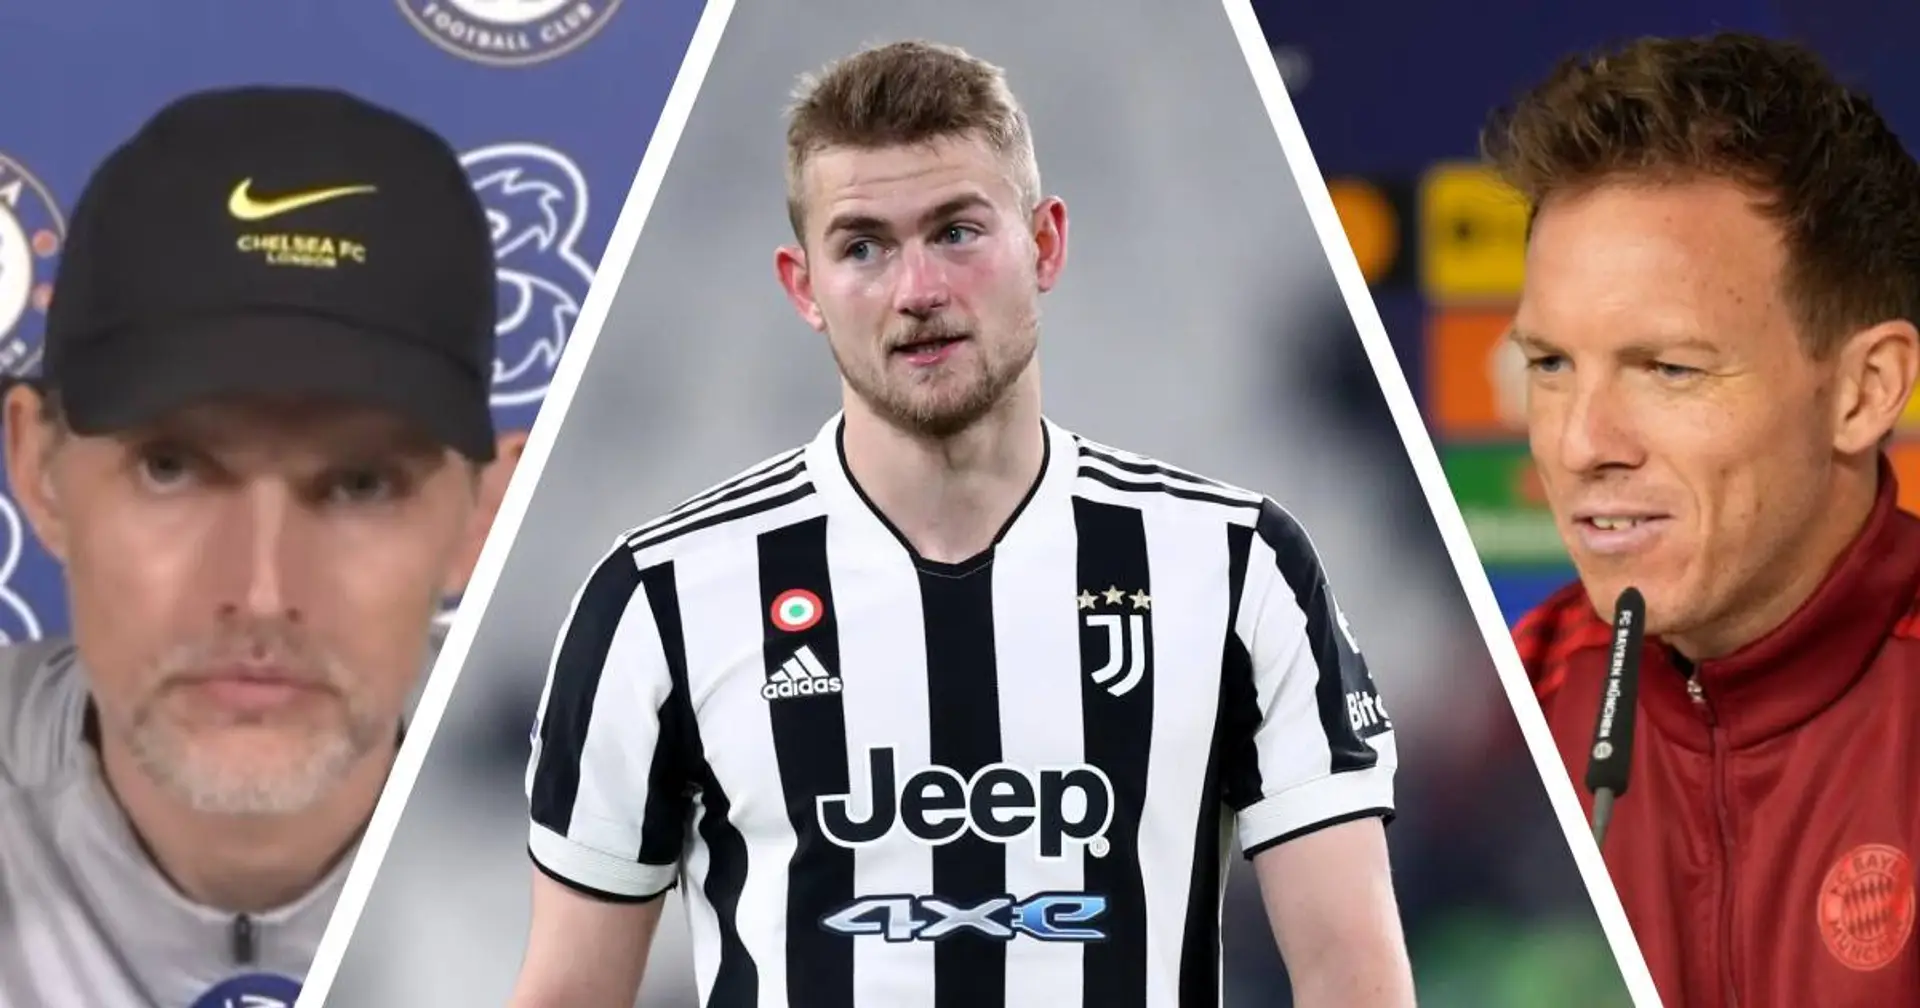 Explained: Why De Ligt reportedly wants to join Bayern over Chelsea